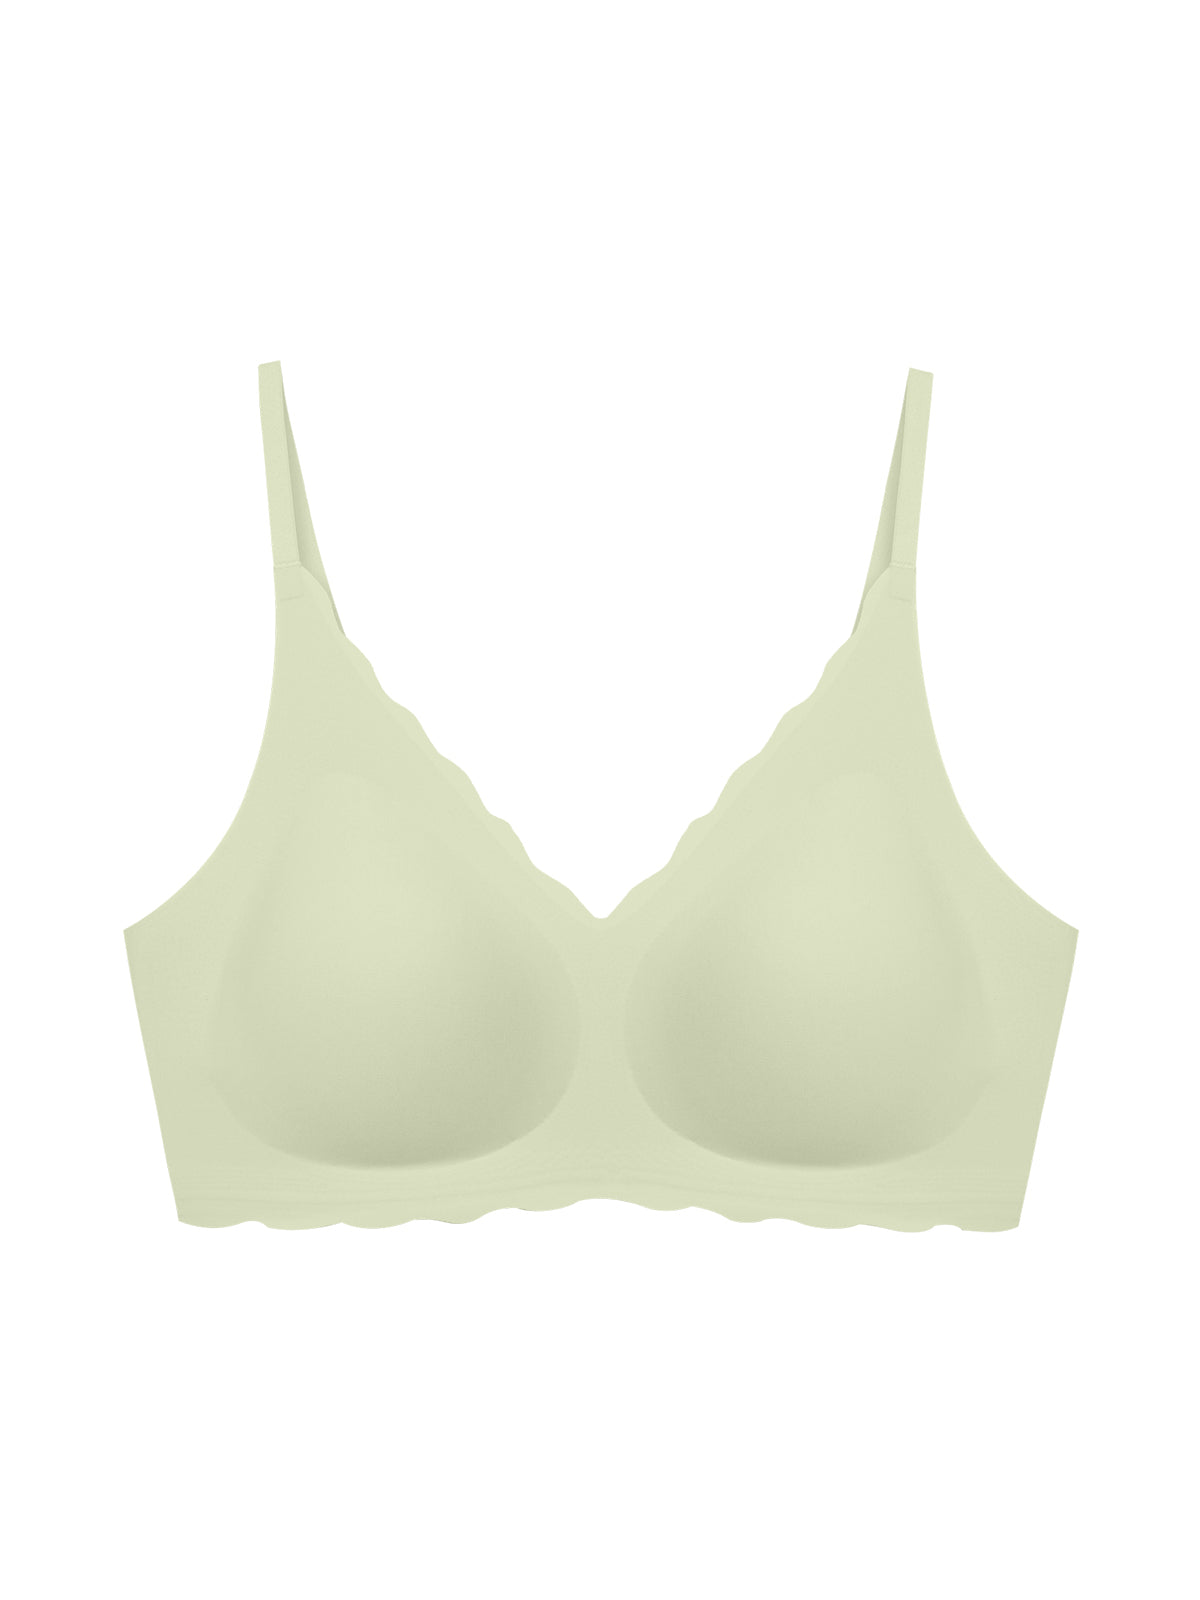 Get 24H Comfort Cloudy Support Wavy Wireless Deep-V Bra - ONE SIZE